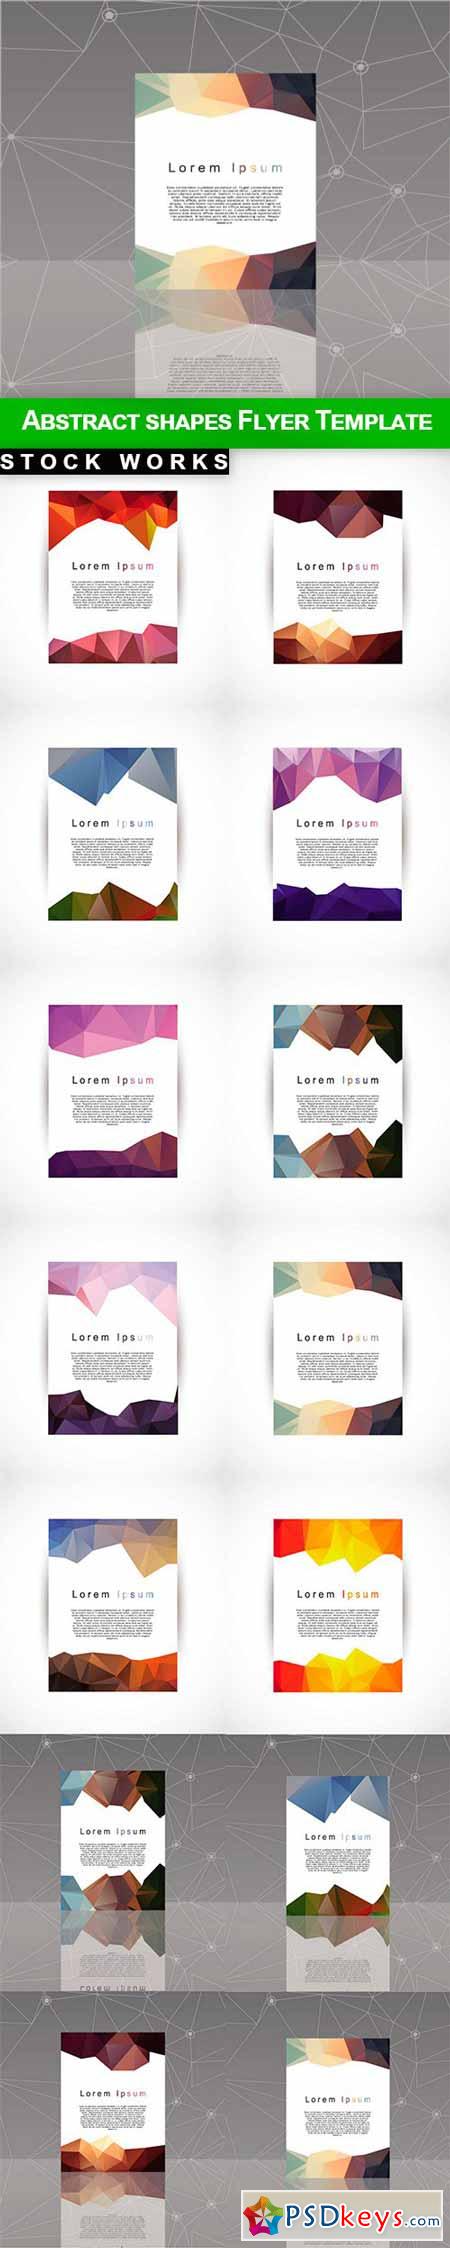 Abstract shapes flyer template - 14 EPS